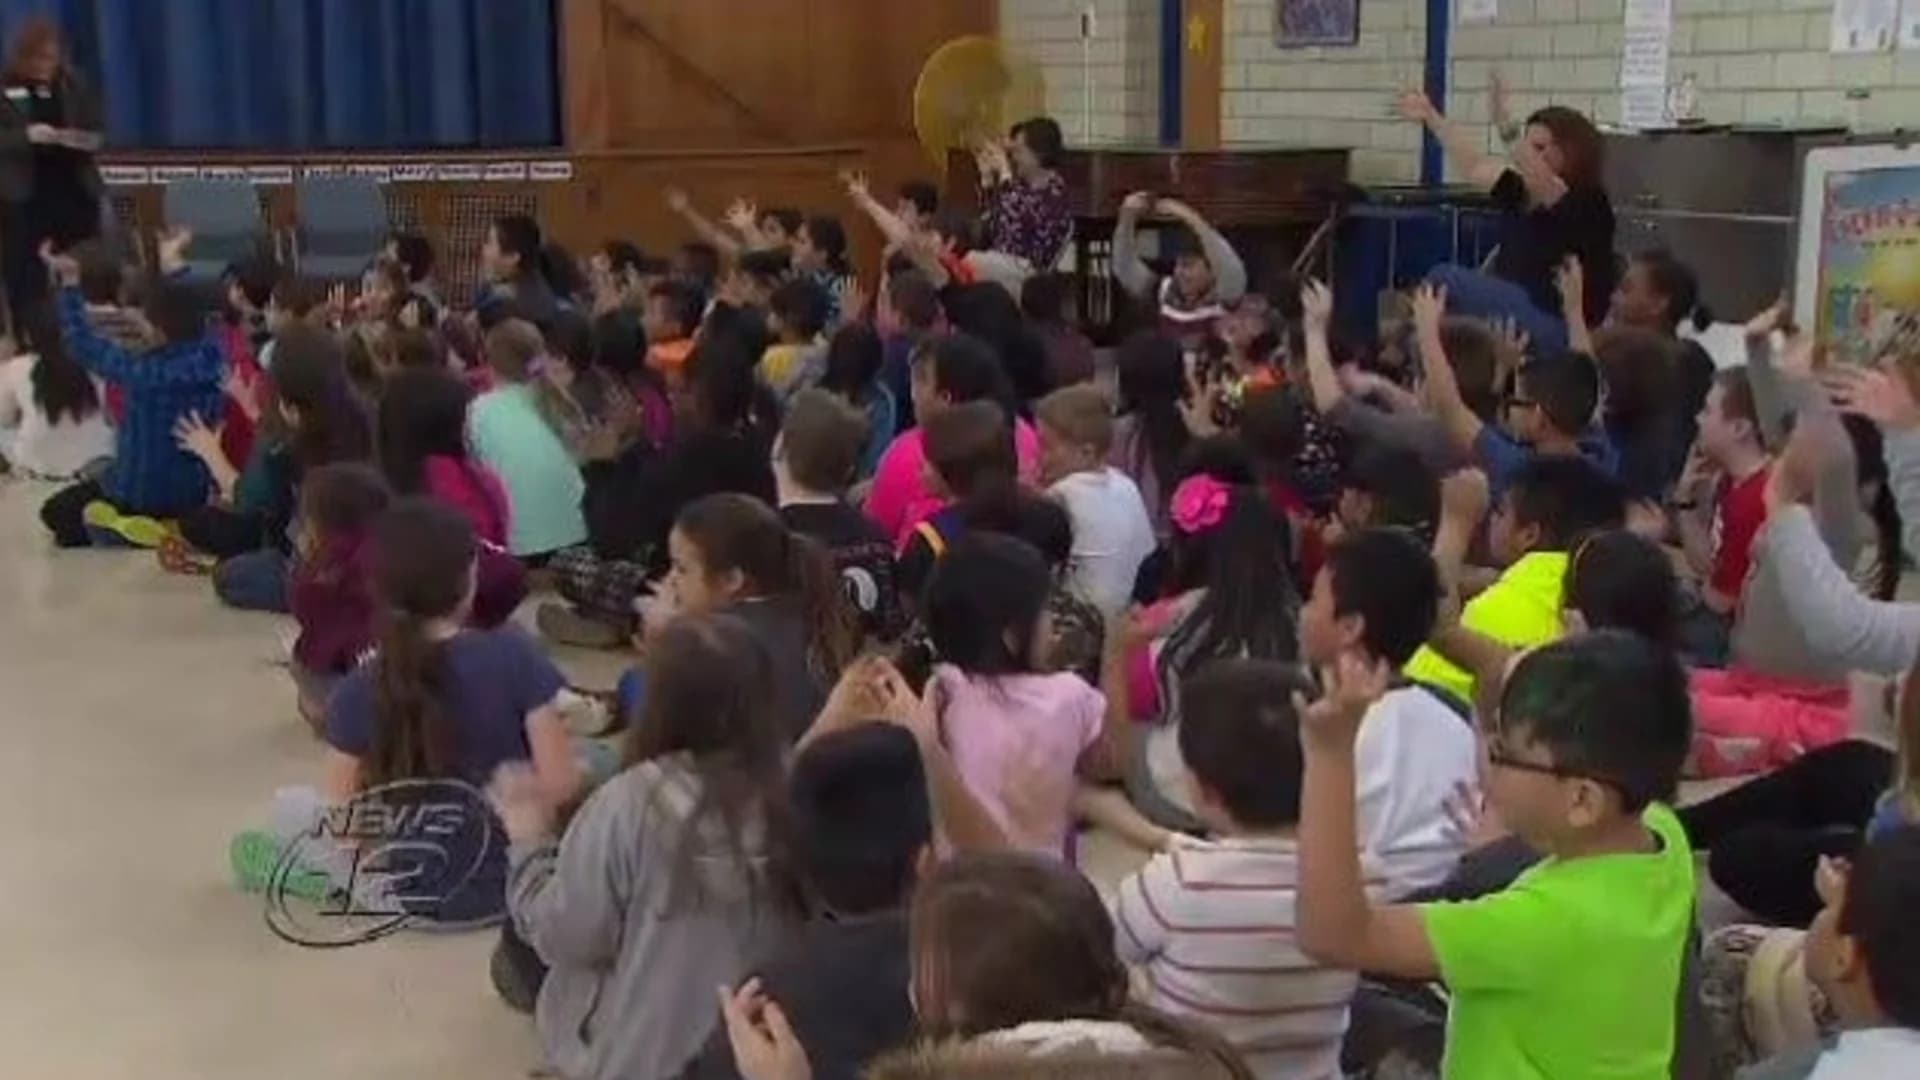 4th-graders take oath to eat healthy in Ossining